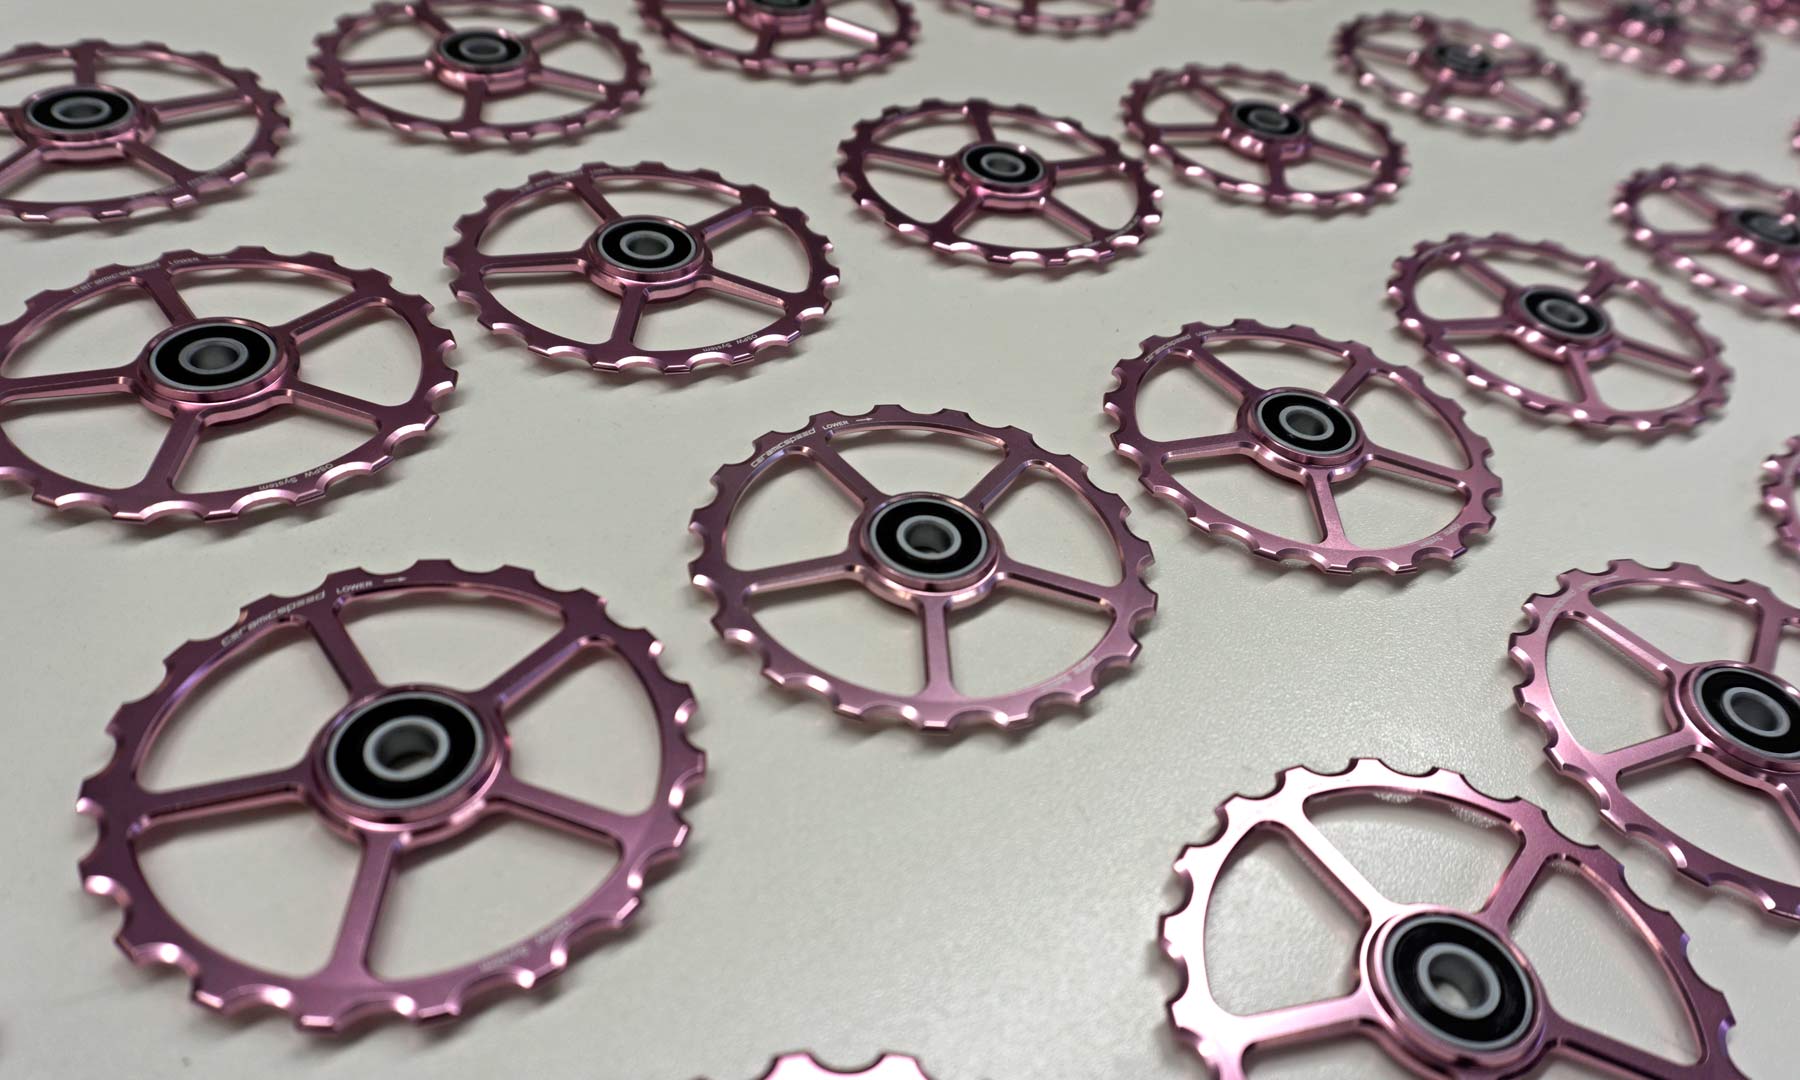 CeramicSpeed spin up Limited Edition Pink Pulleys at the Giro